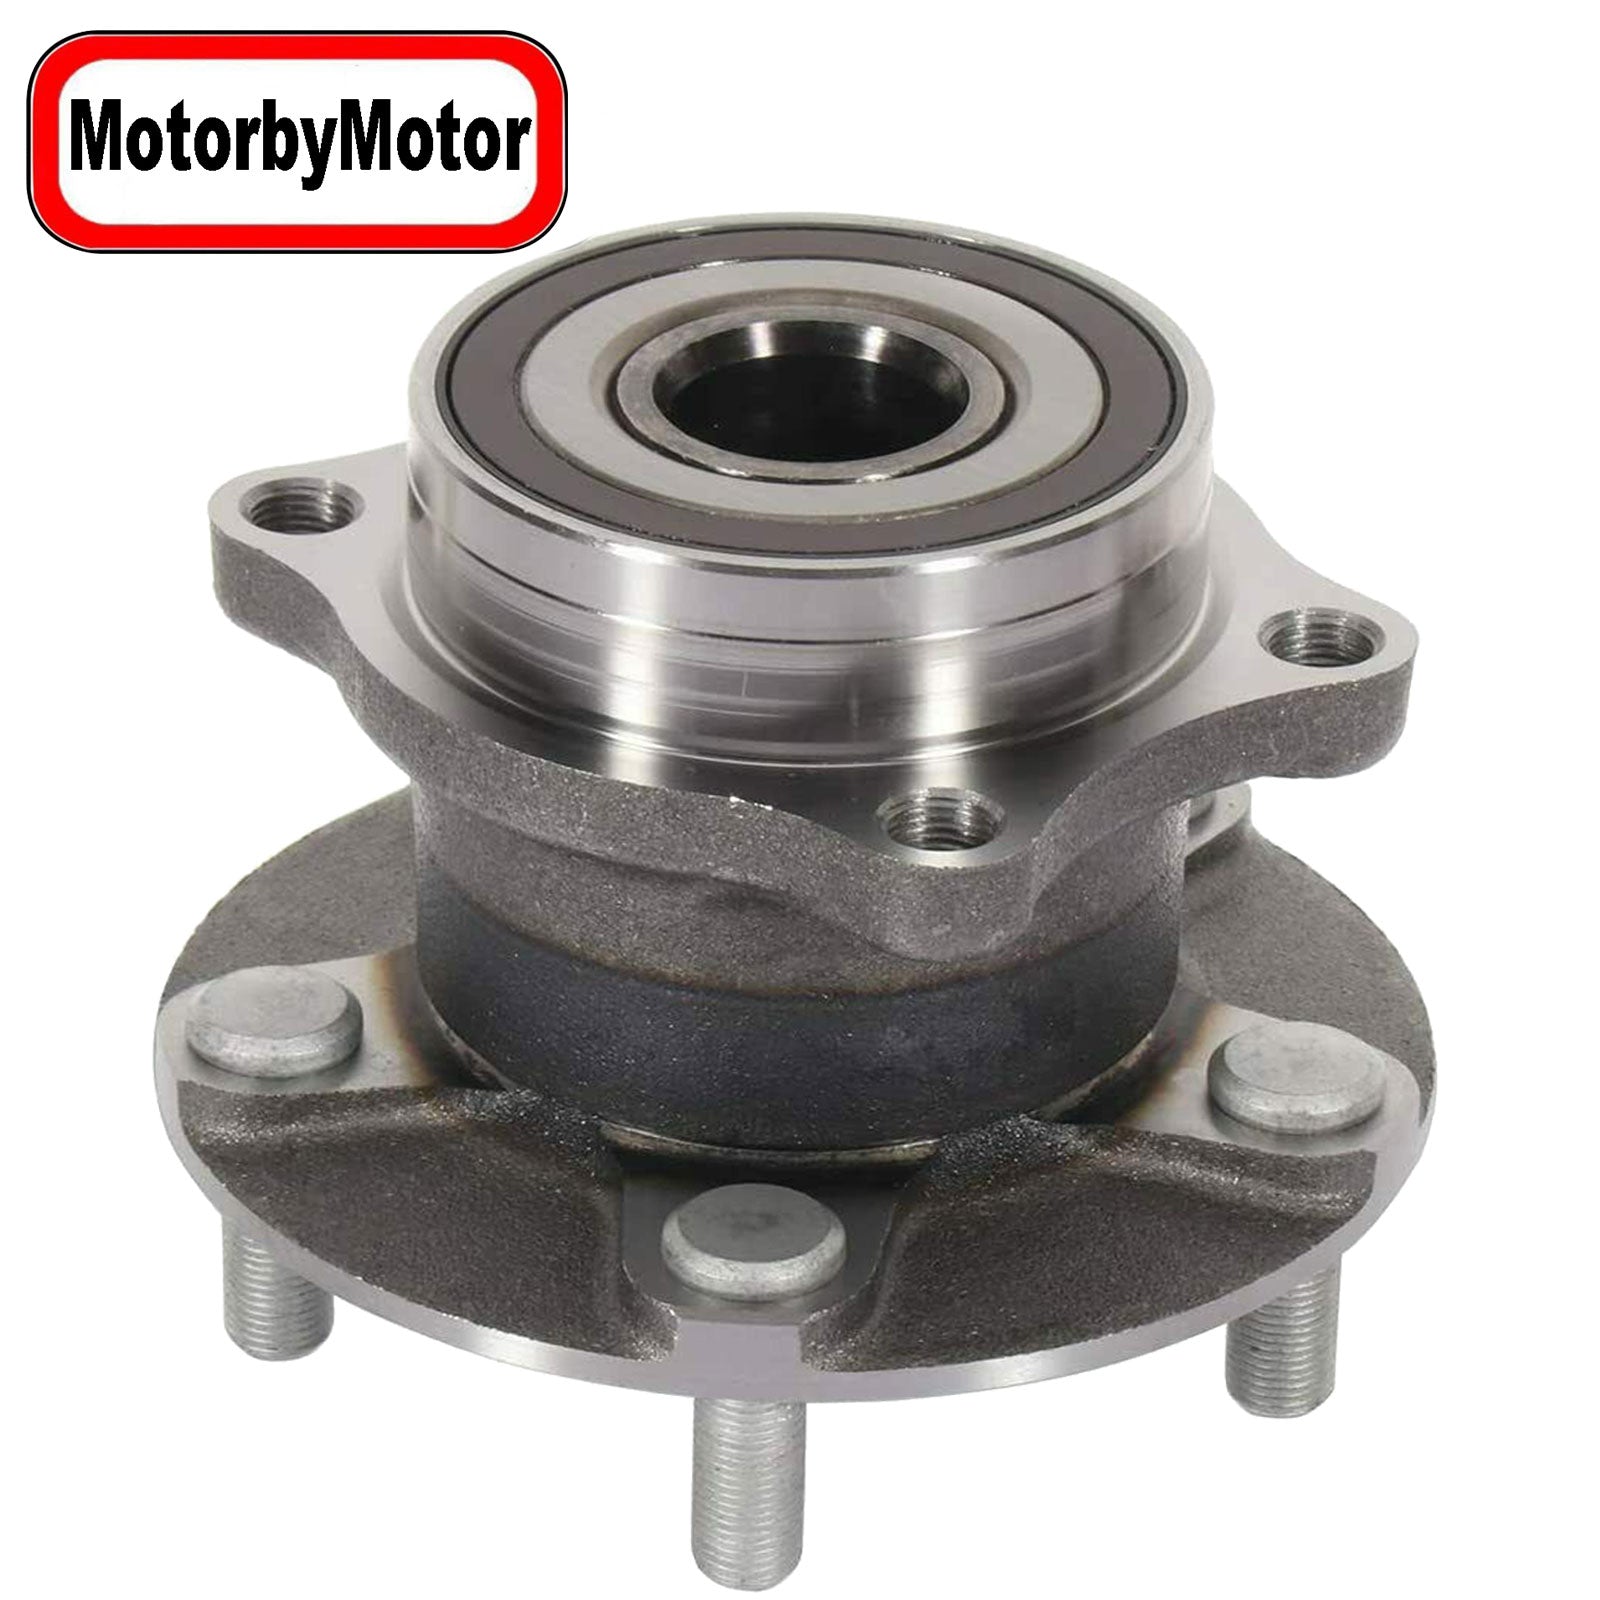 MotorbyMotor 512536 Rear Wheel Bearing and Hub Assembly w/5 Lugs Fits for Subaru Ascent Forester Legacy Outback WRX STI Low-Runout OE Directly Replacement Hub Bearing MotorbyMotor